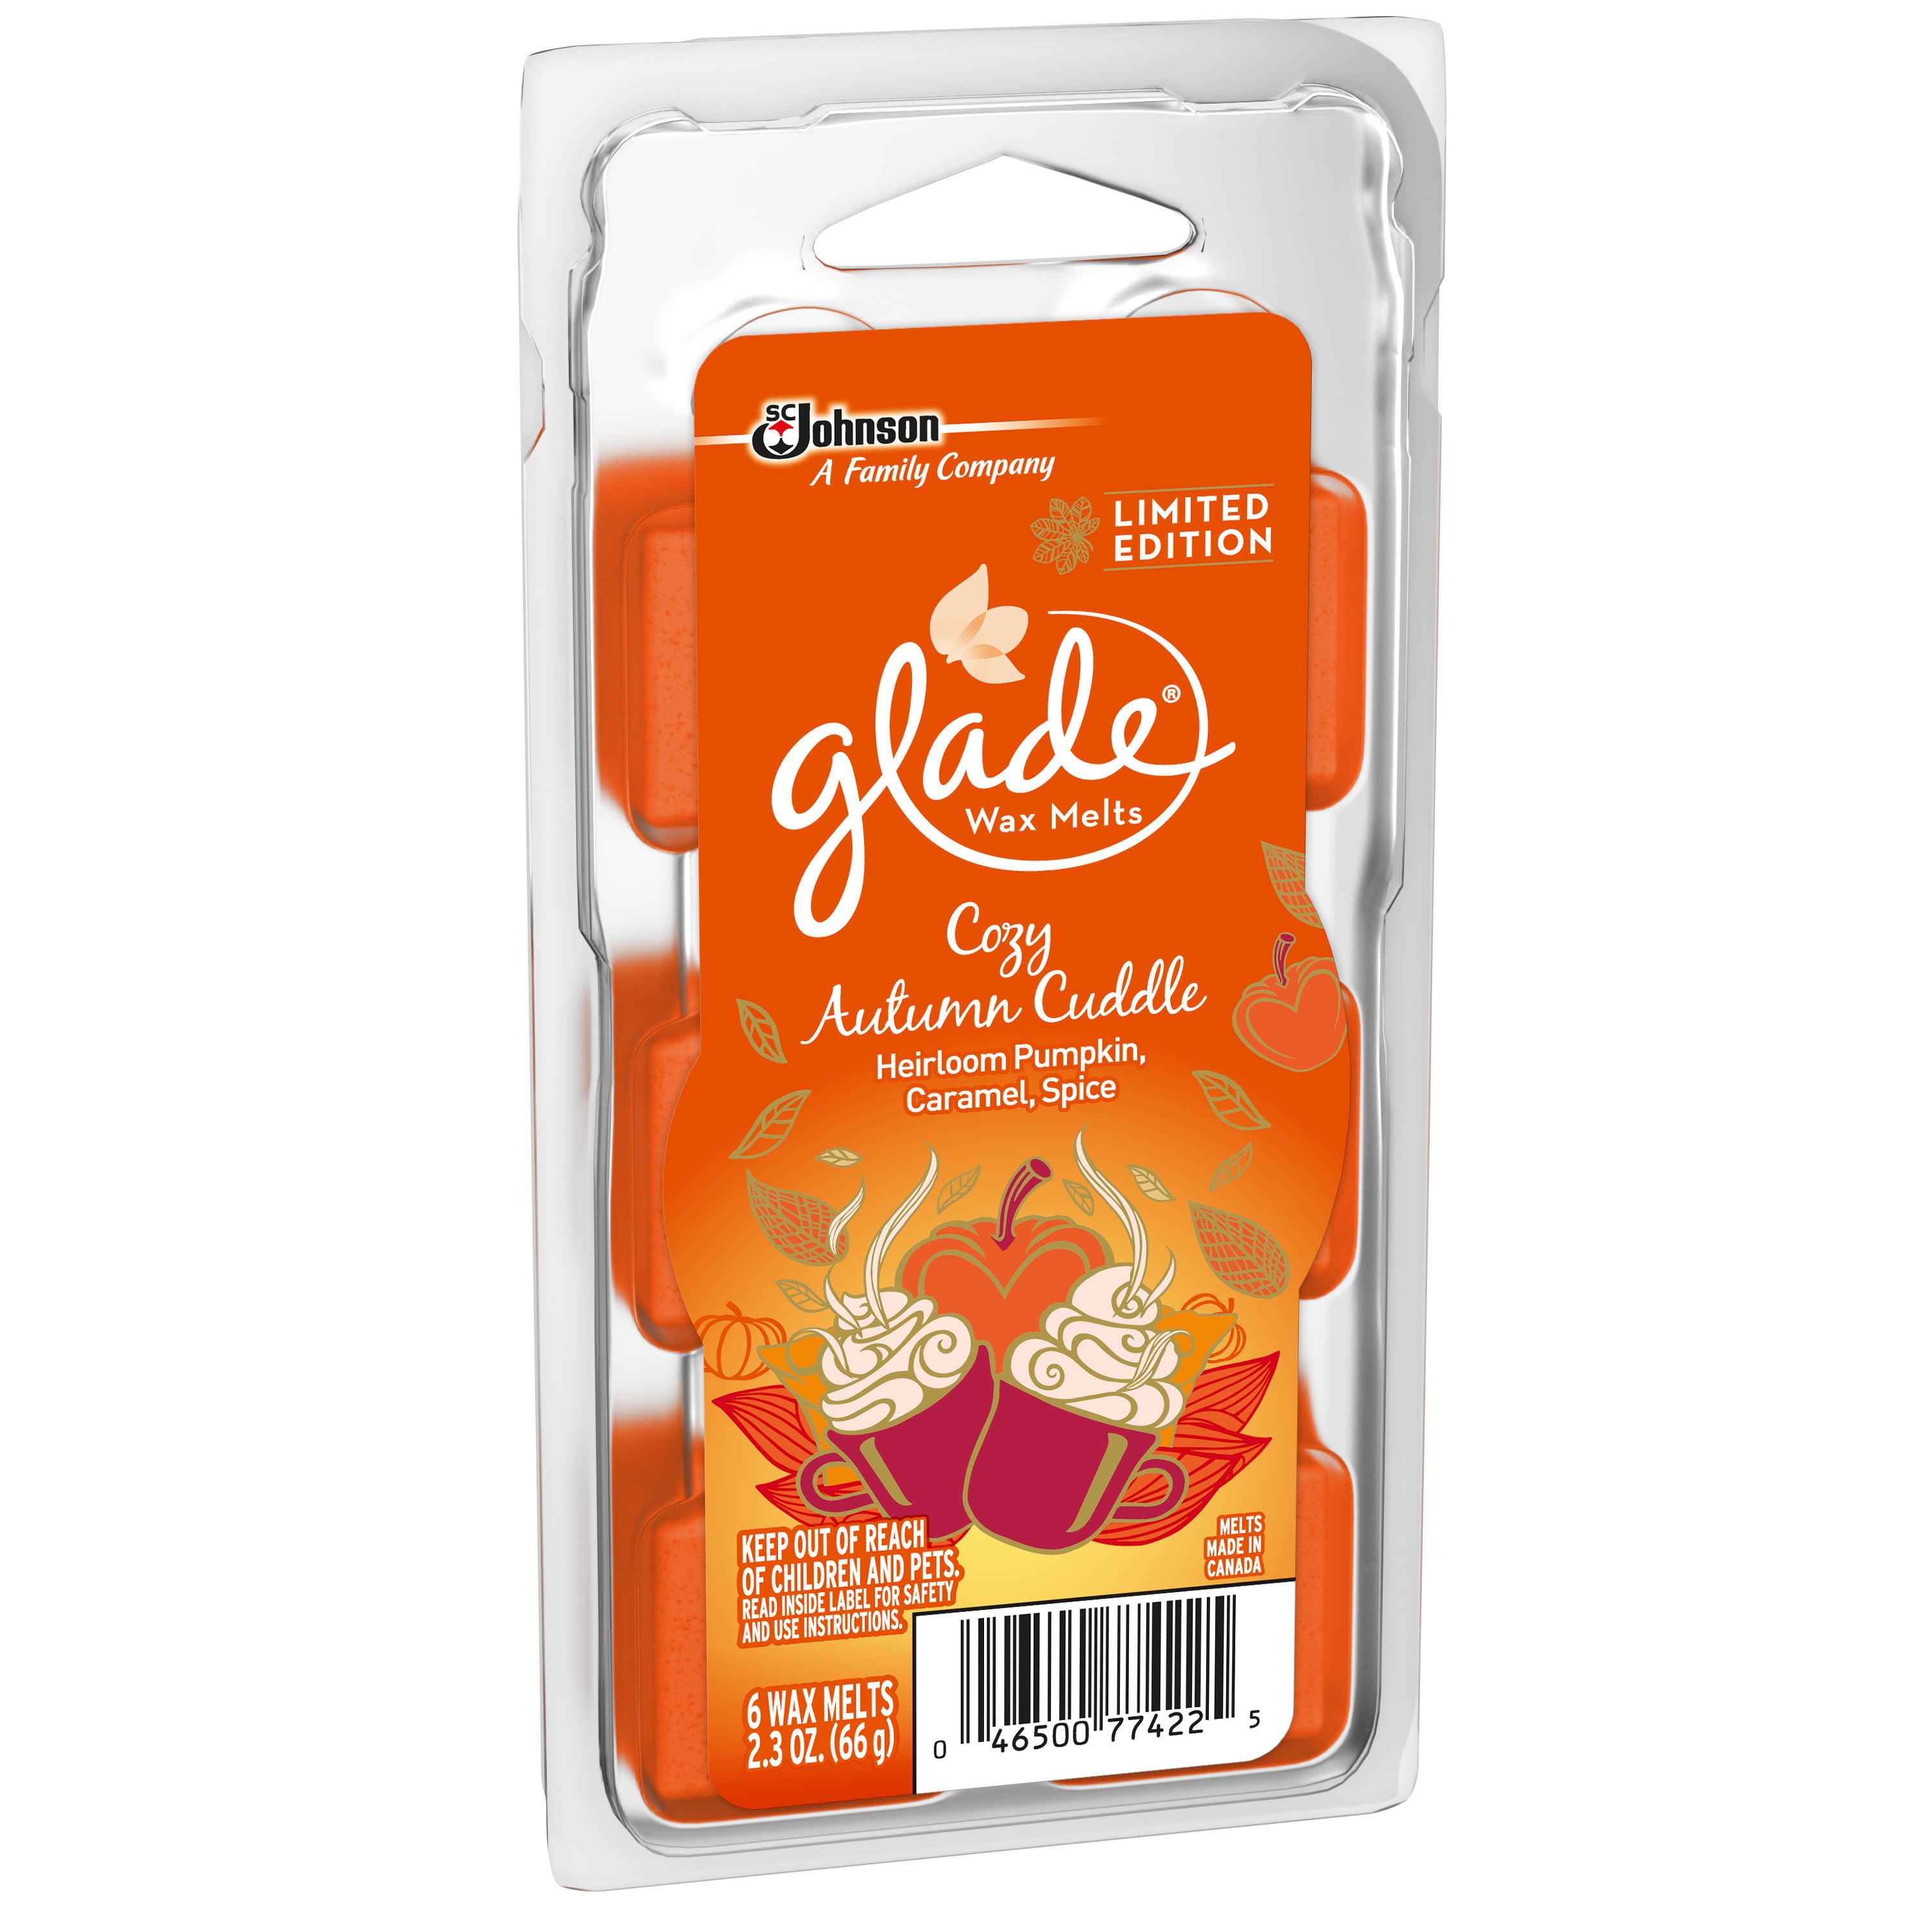 4X Sets Glade Cozy Autumn Cuddle Pumpkin Spice Scented Wax Melts  24 Melts Total 